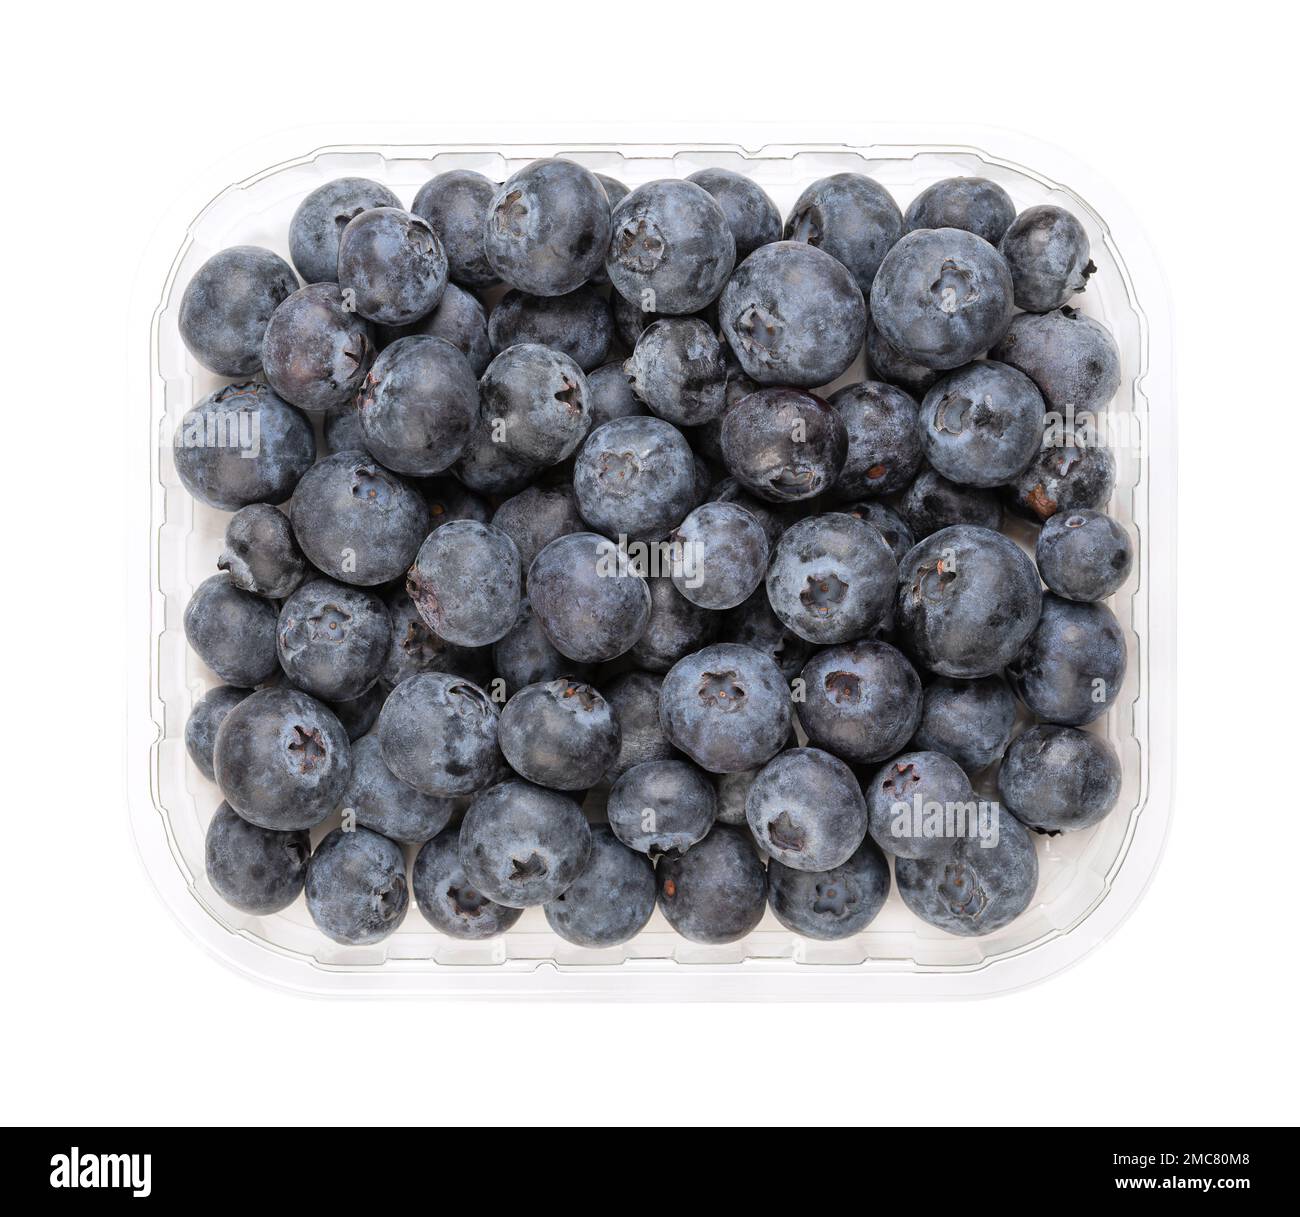 Whole fresh blueberries, in a clear plastic punnet, from above. Dark blue colored, ripe, raw fruits of Vaccinium corymbosum. Stock Photo